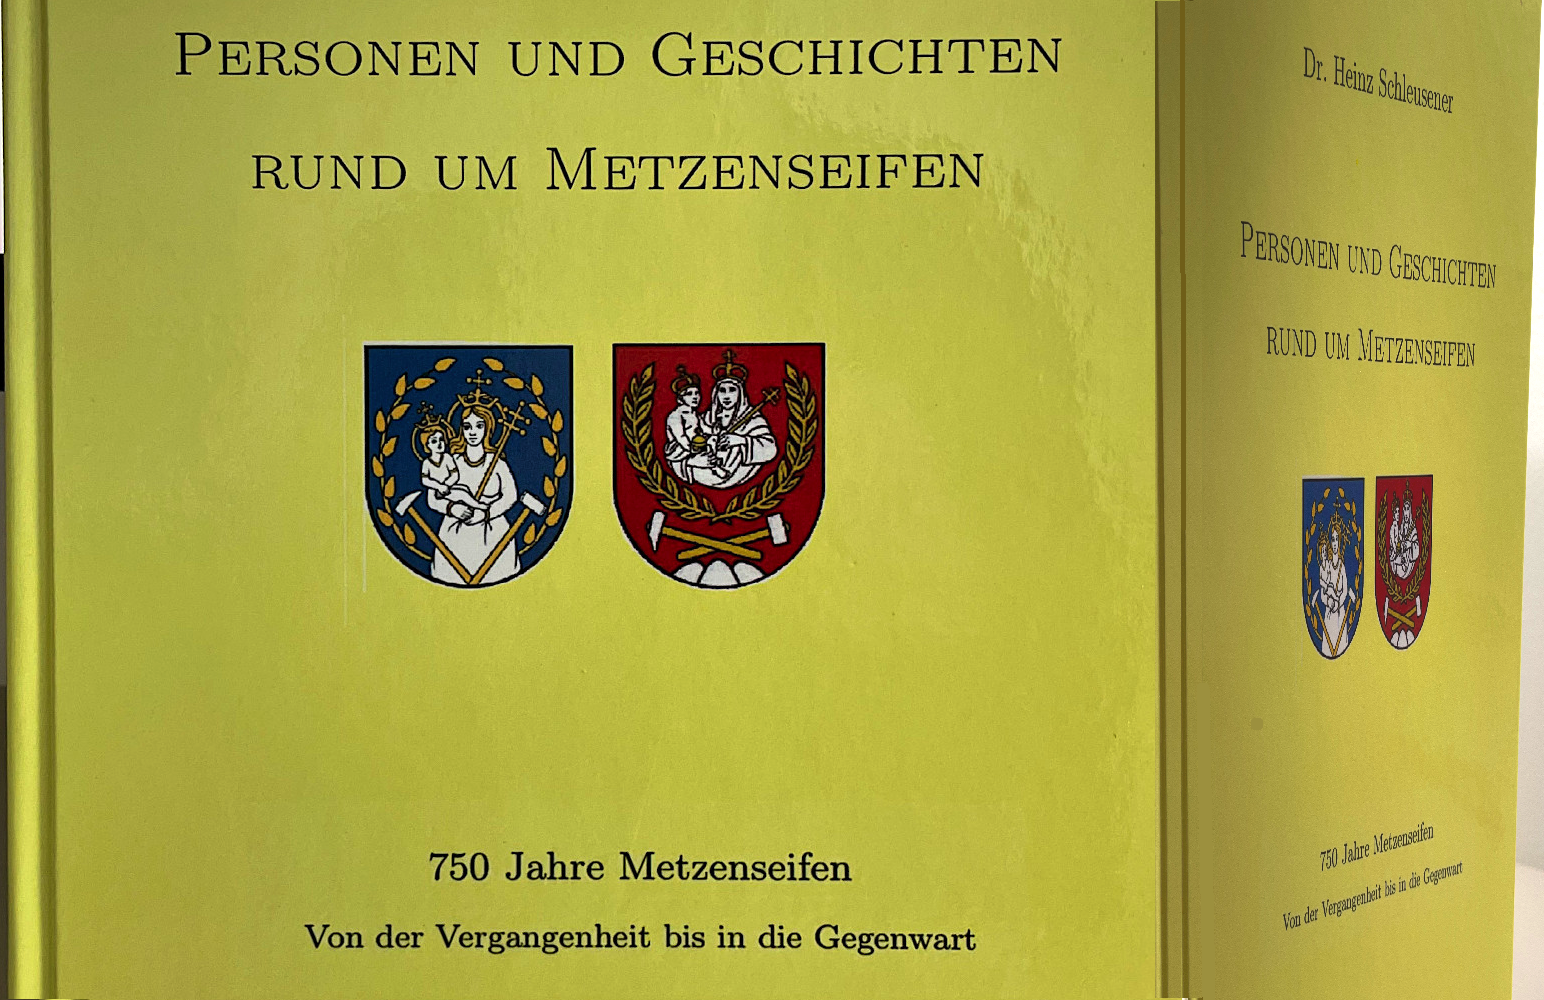 The book for the 750th anniversary of Metzenseifen